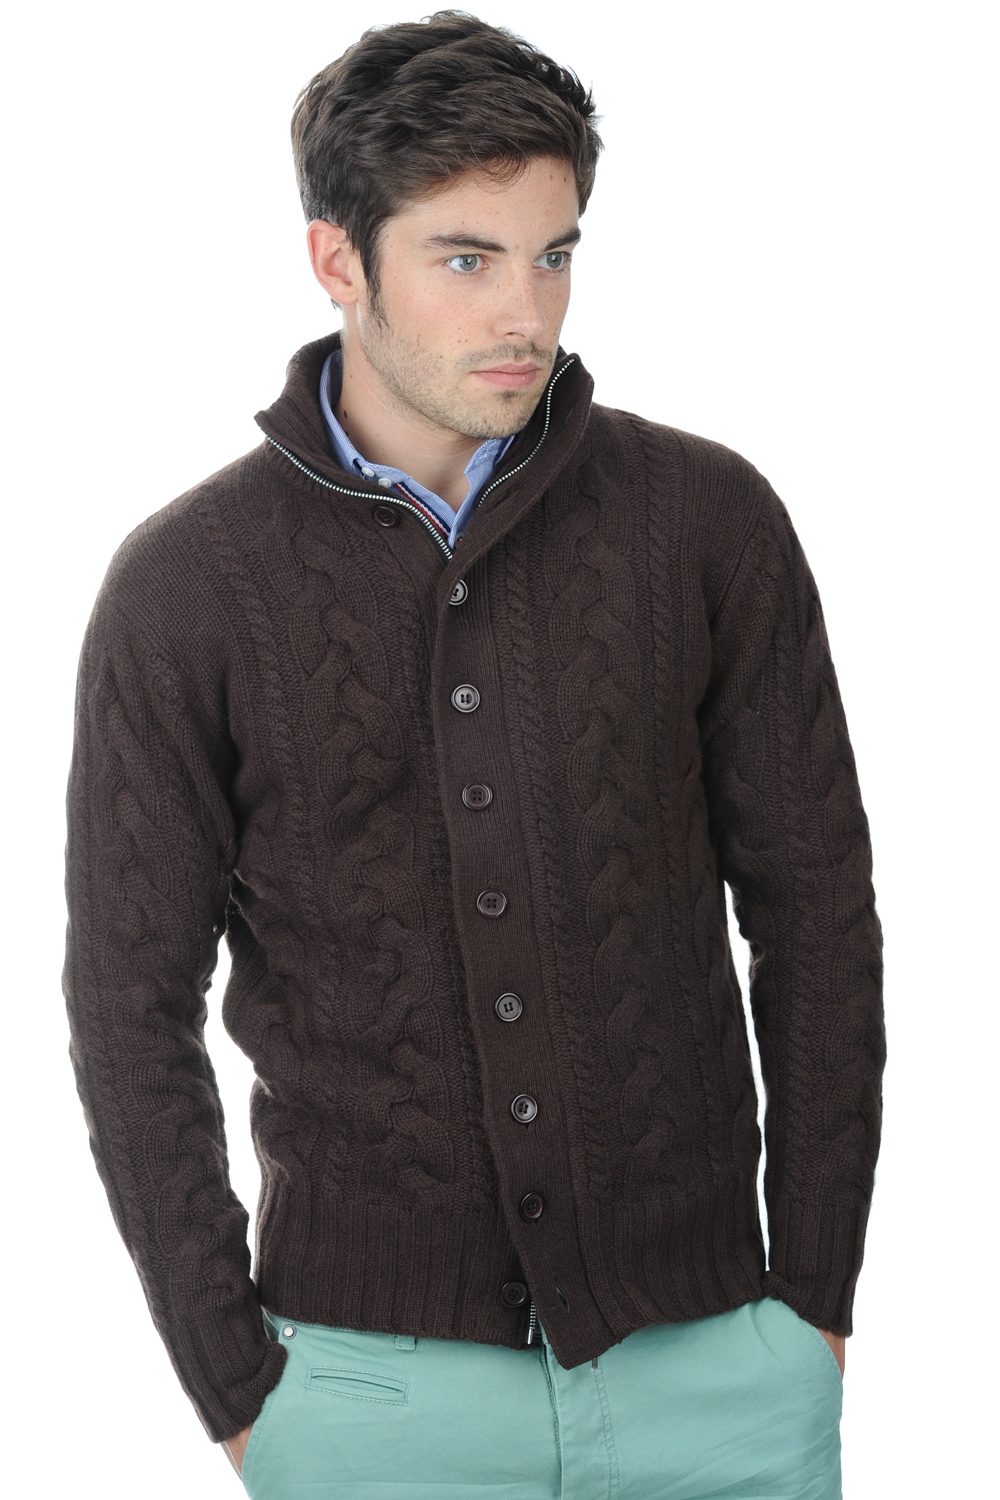 Cachemire pull homme loris capuccino xl